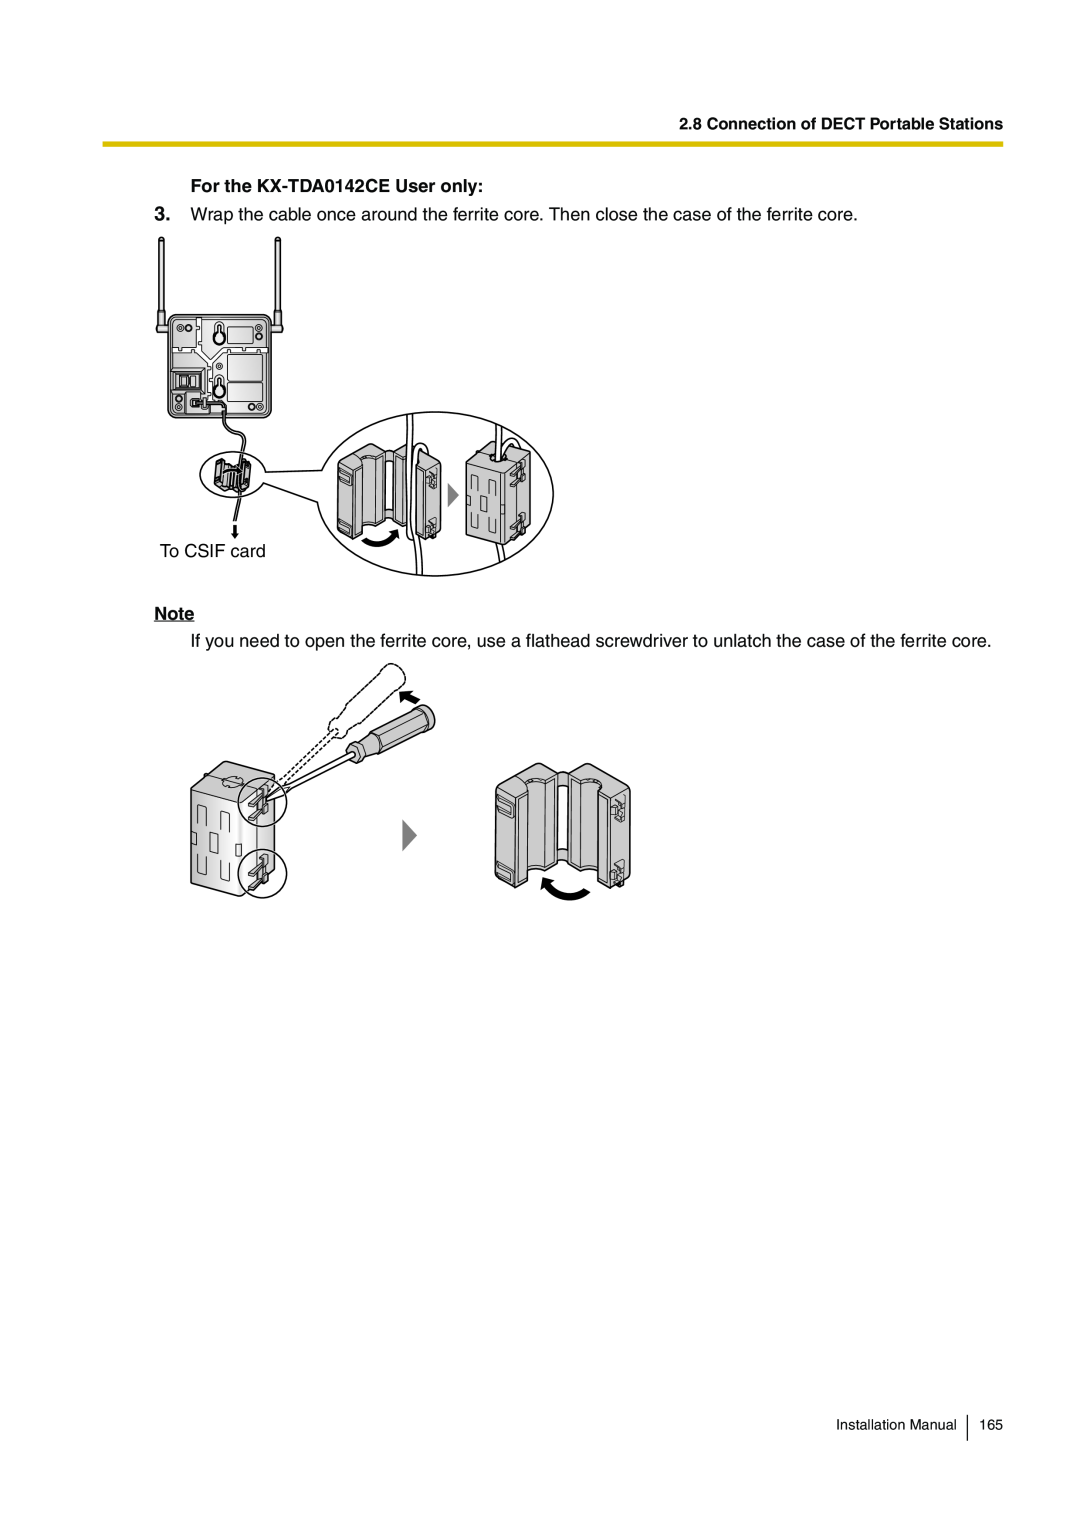 Panasonic KX-TDA100 installation manual For the KX-TDA0142CE User only 